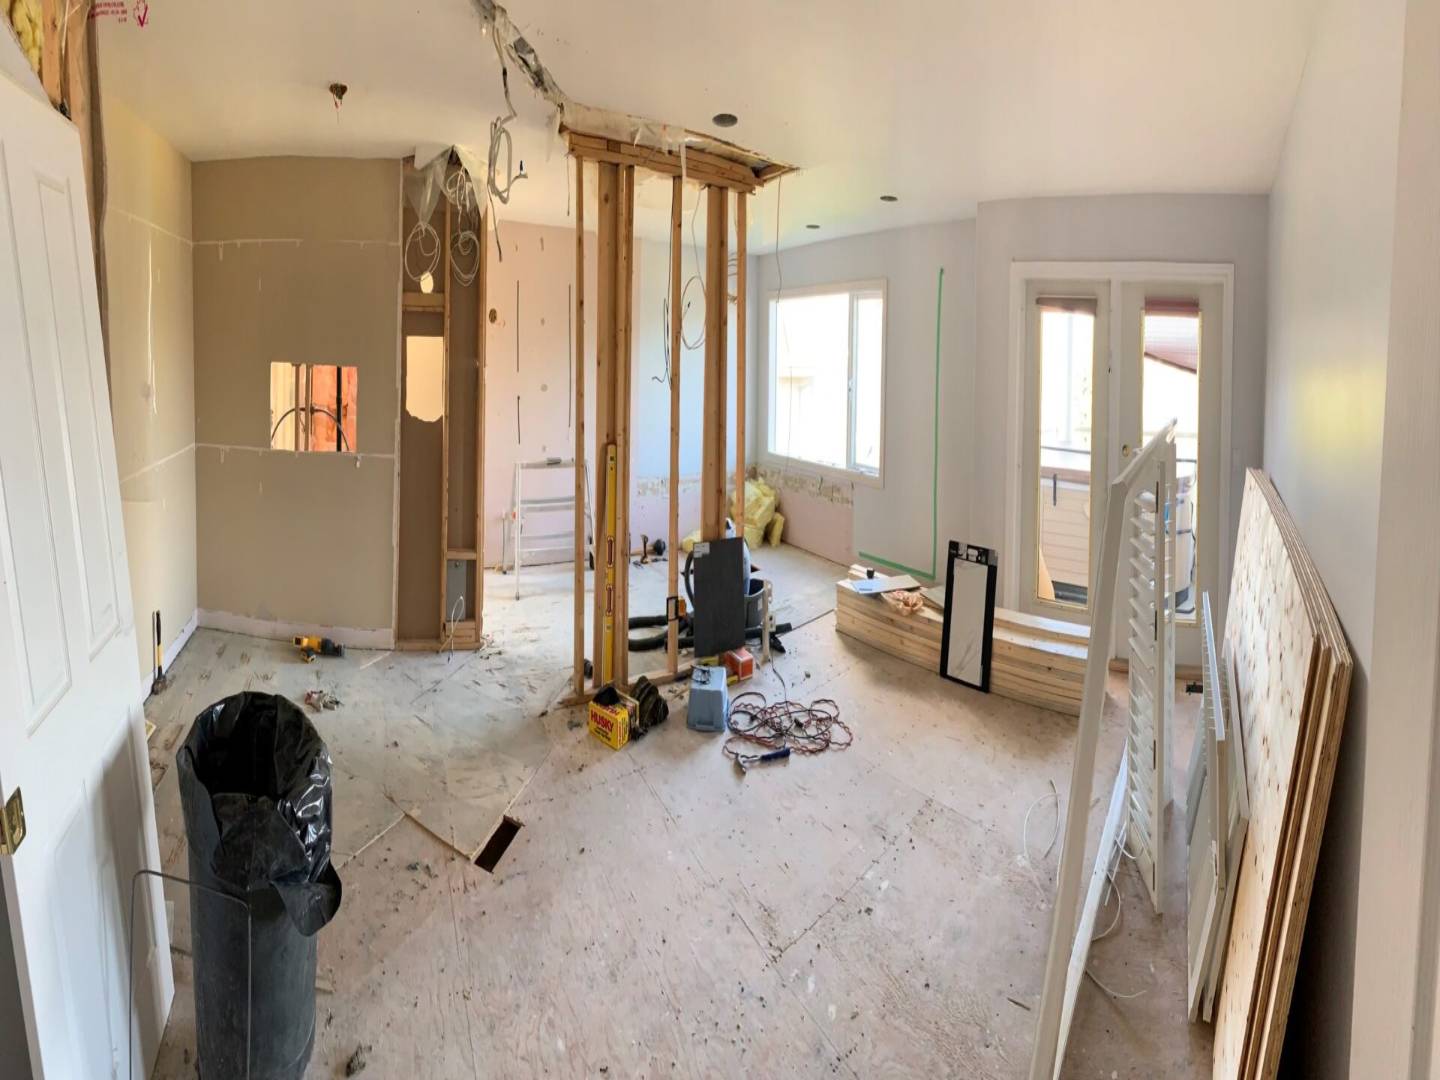 A room being remodeled with the walls in place.